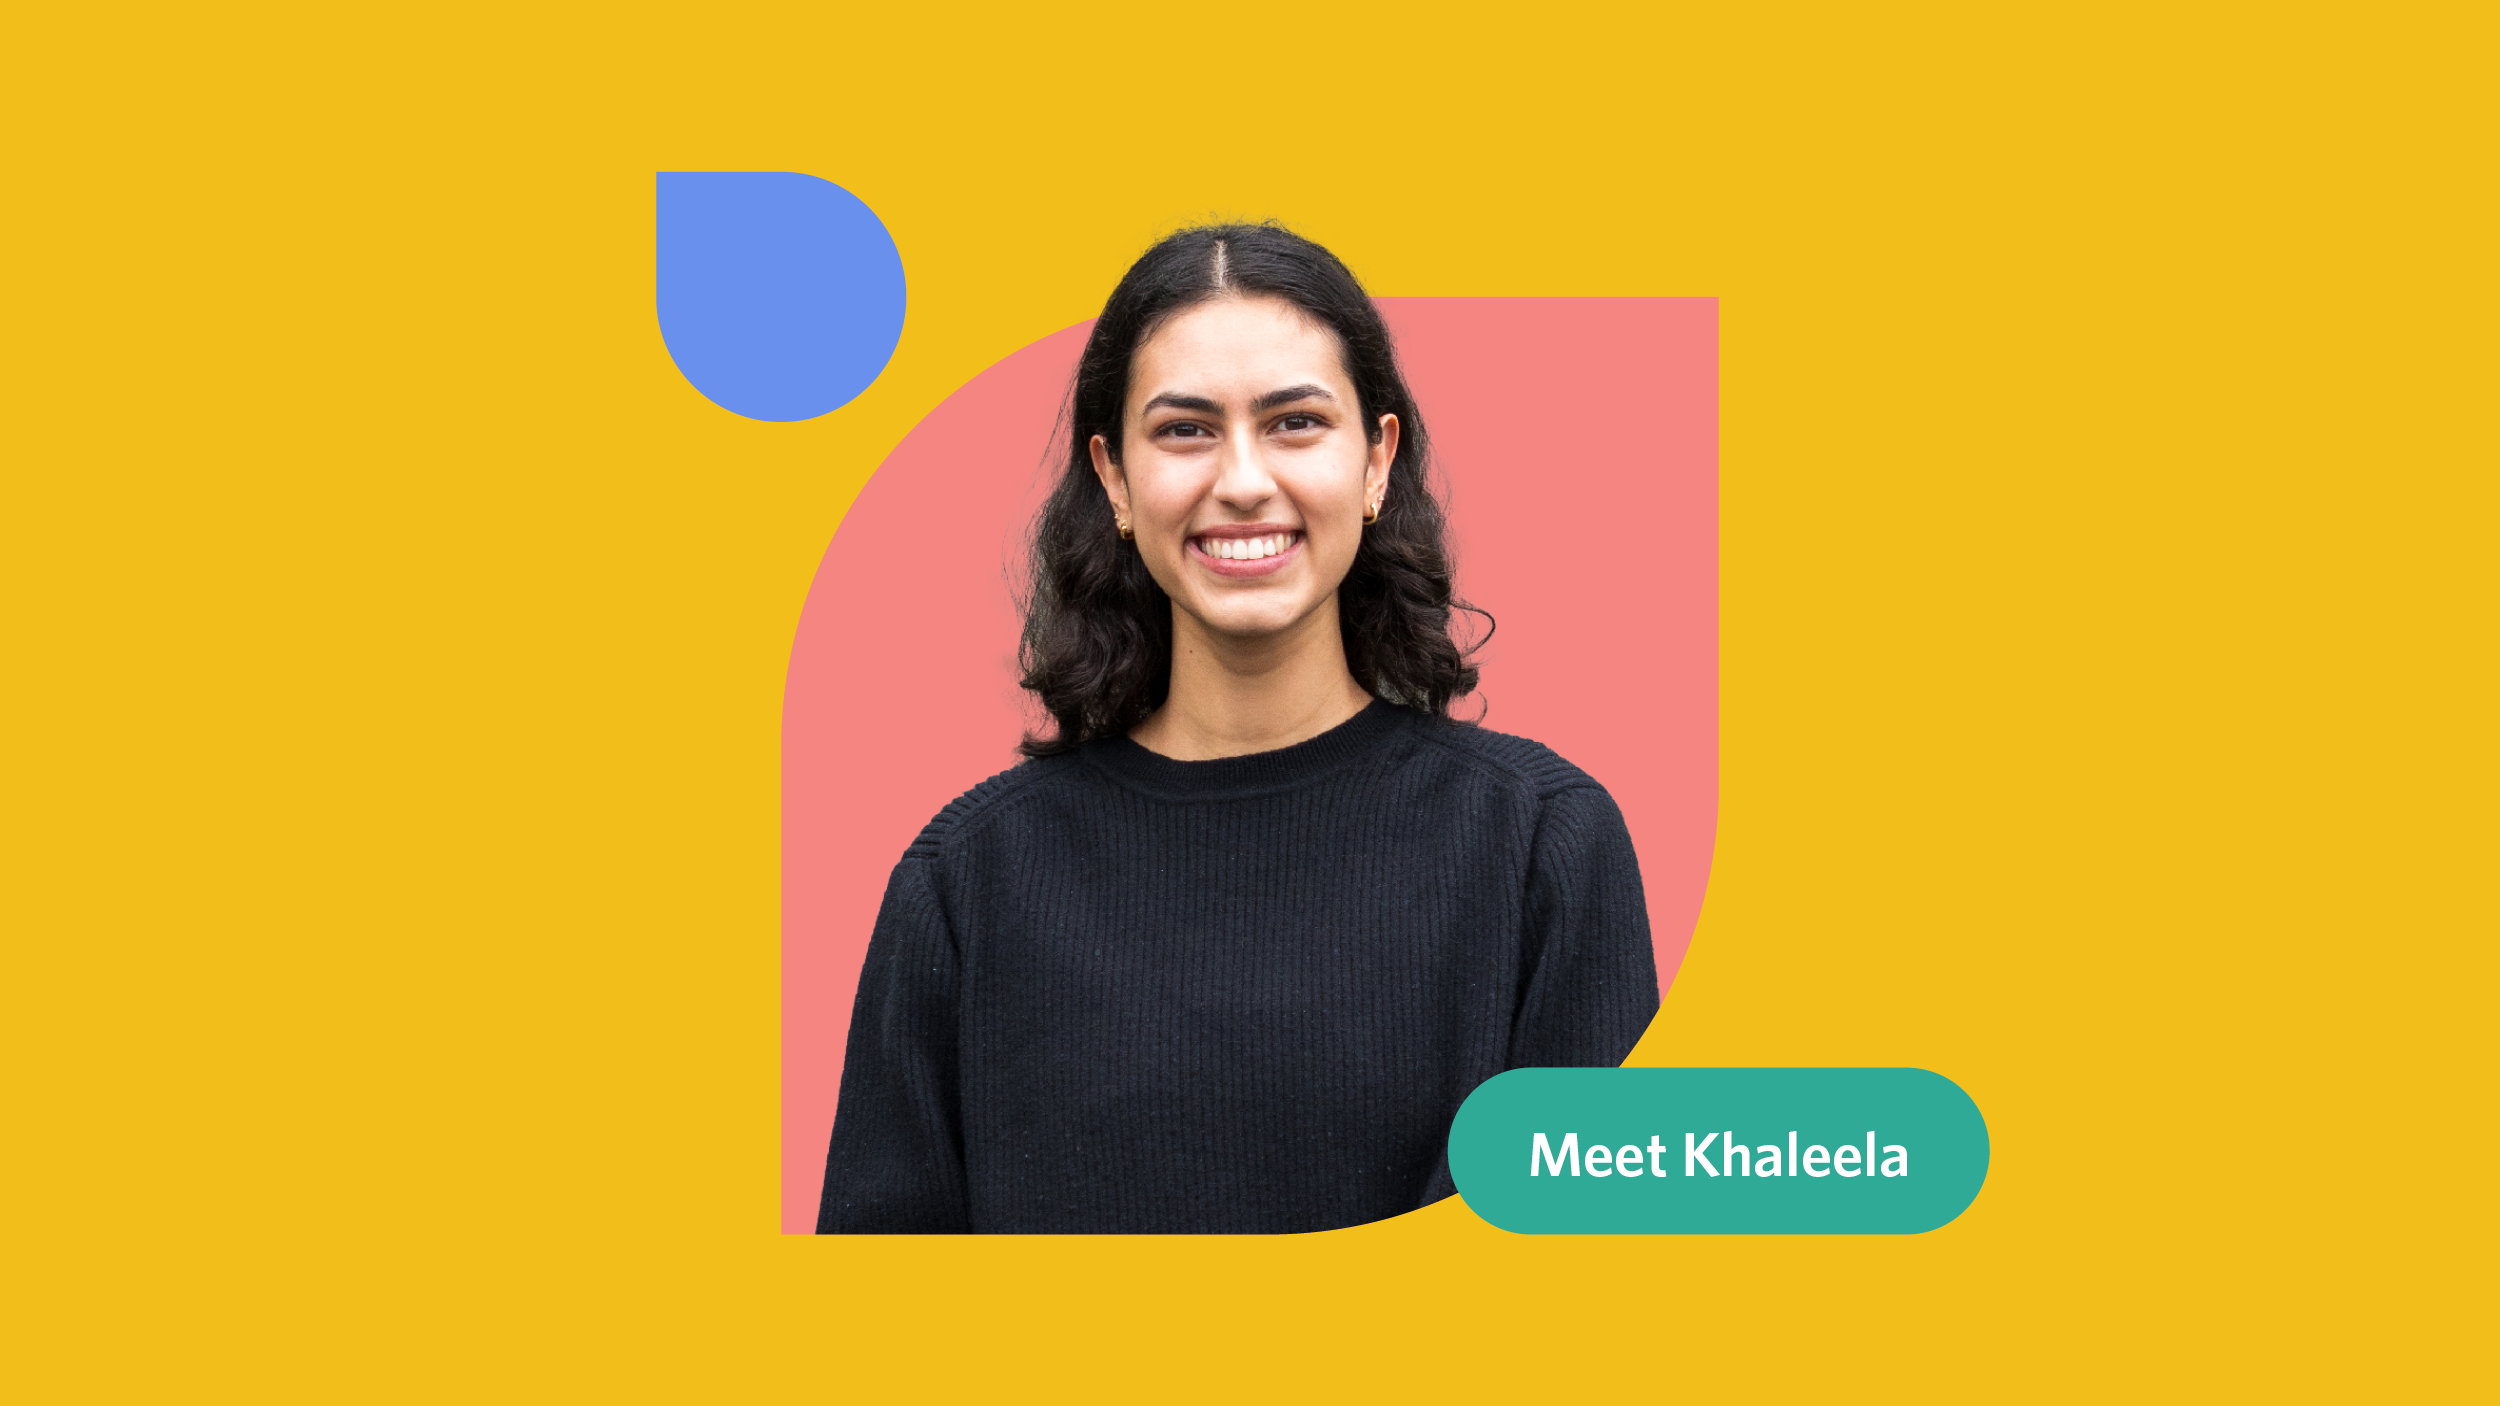 Yellow, pink, and blue graphic with a photo of Khaleela Skinner with the text "Meet Khaleela"